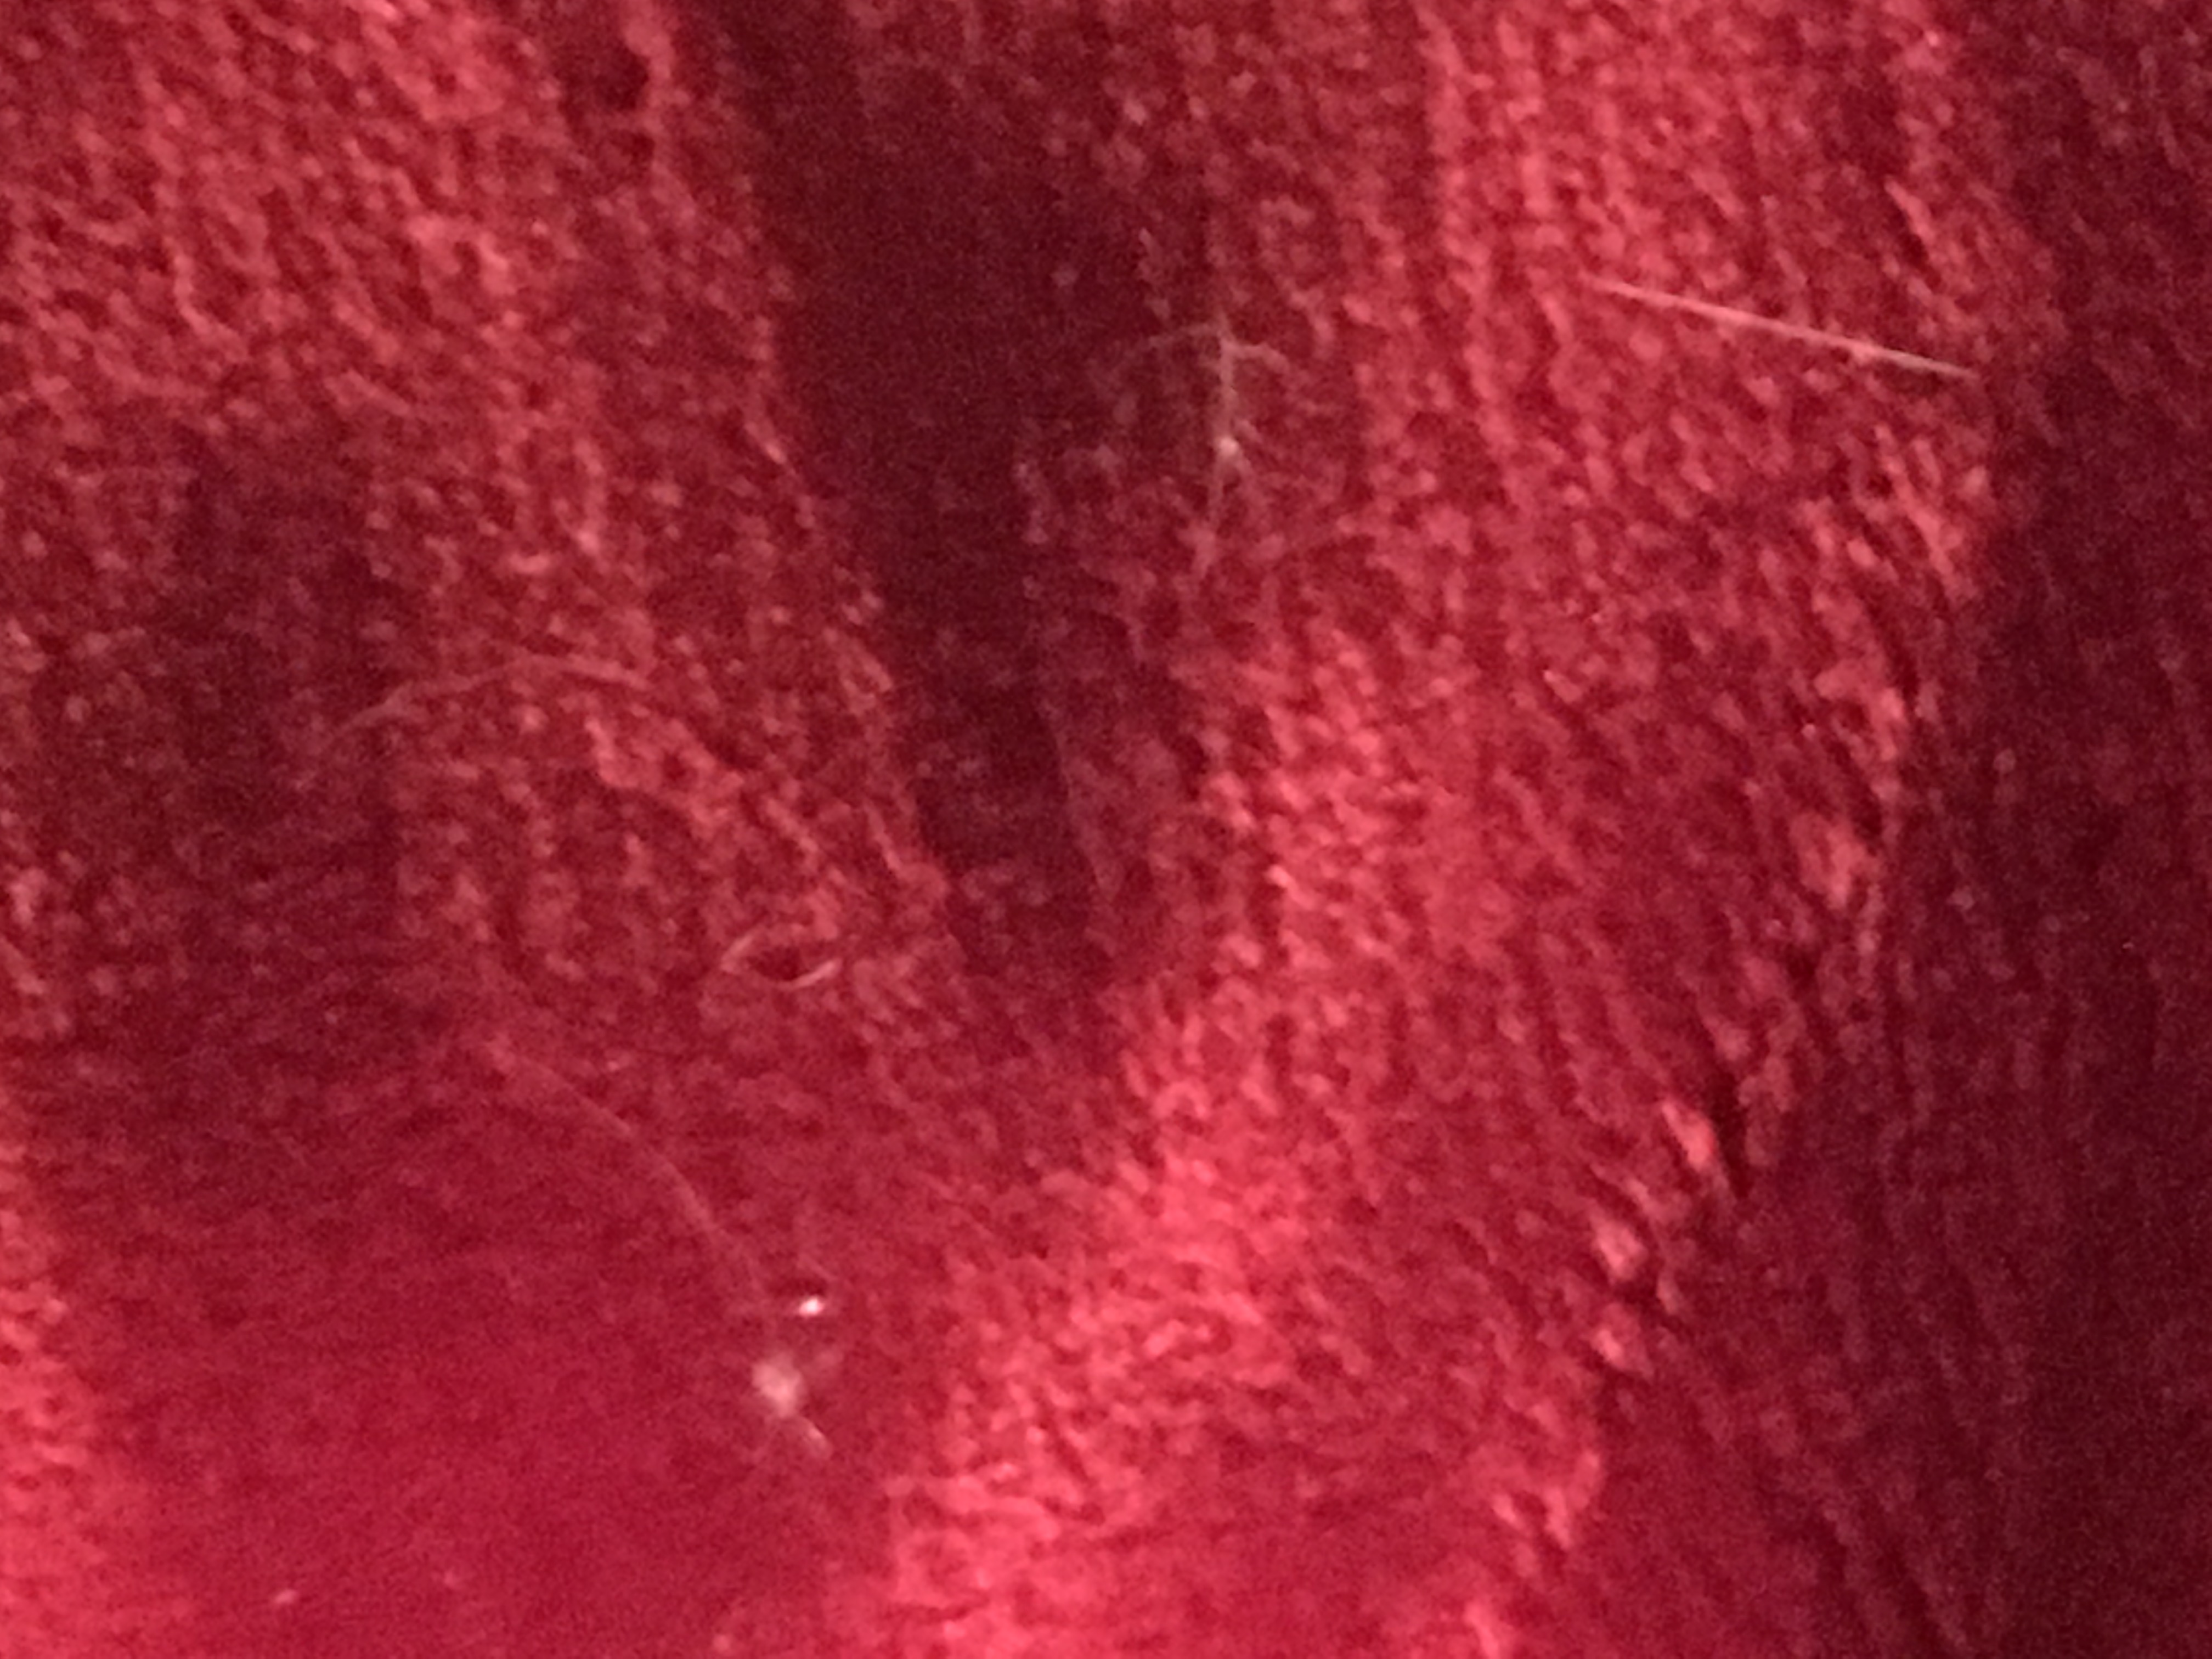 dog hairs on bed spread